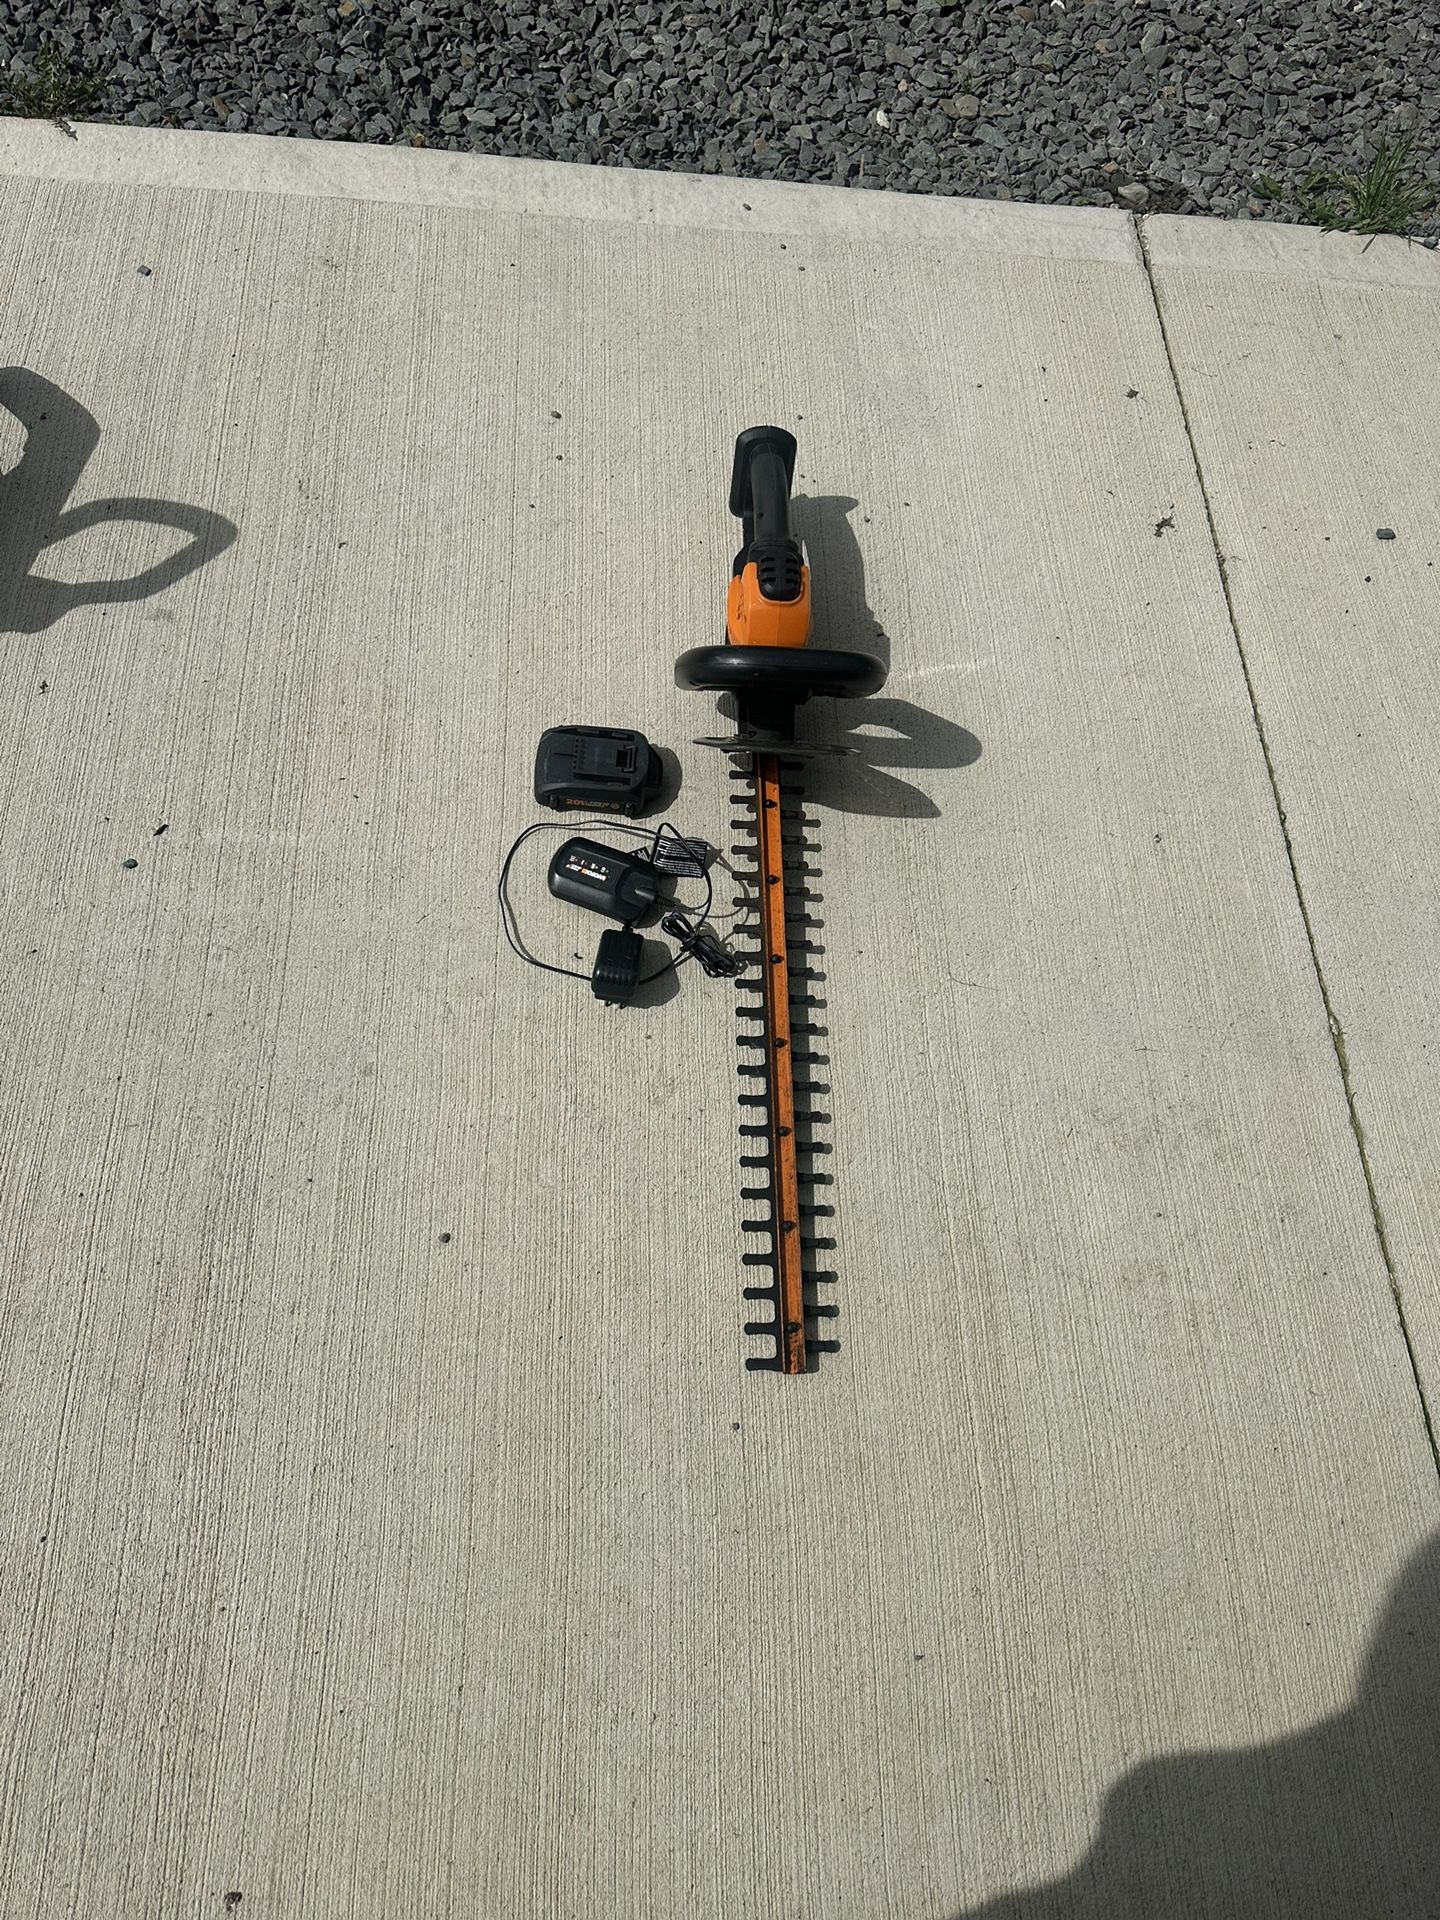 LIKE NEW WORX 20V POWER SHARE 22" CORDLESS HEDGE TRIMMER BATTERY AND CHARGER $85